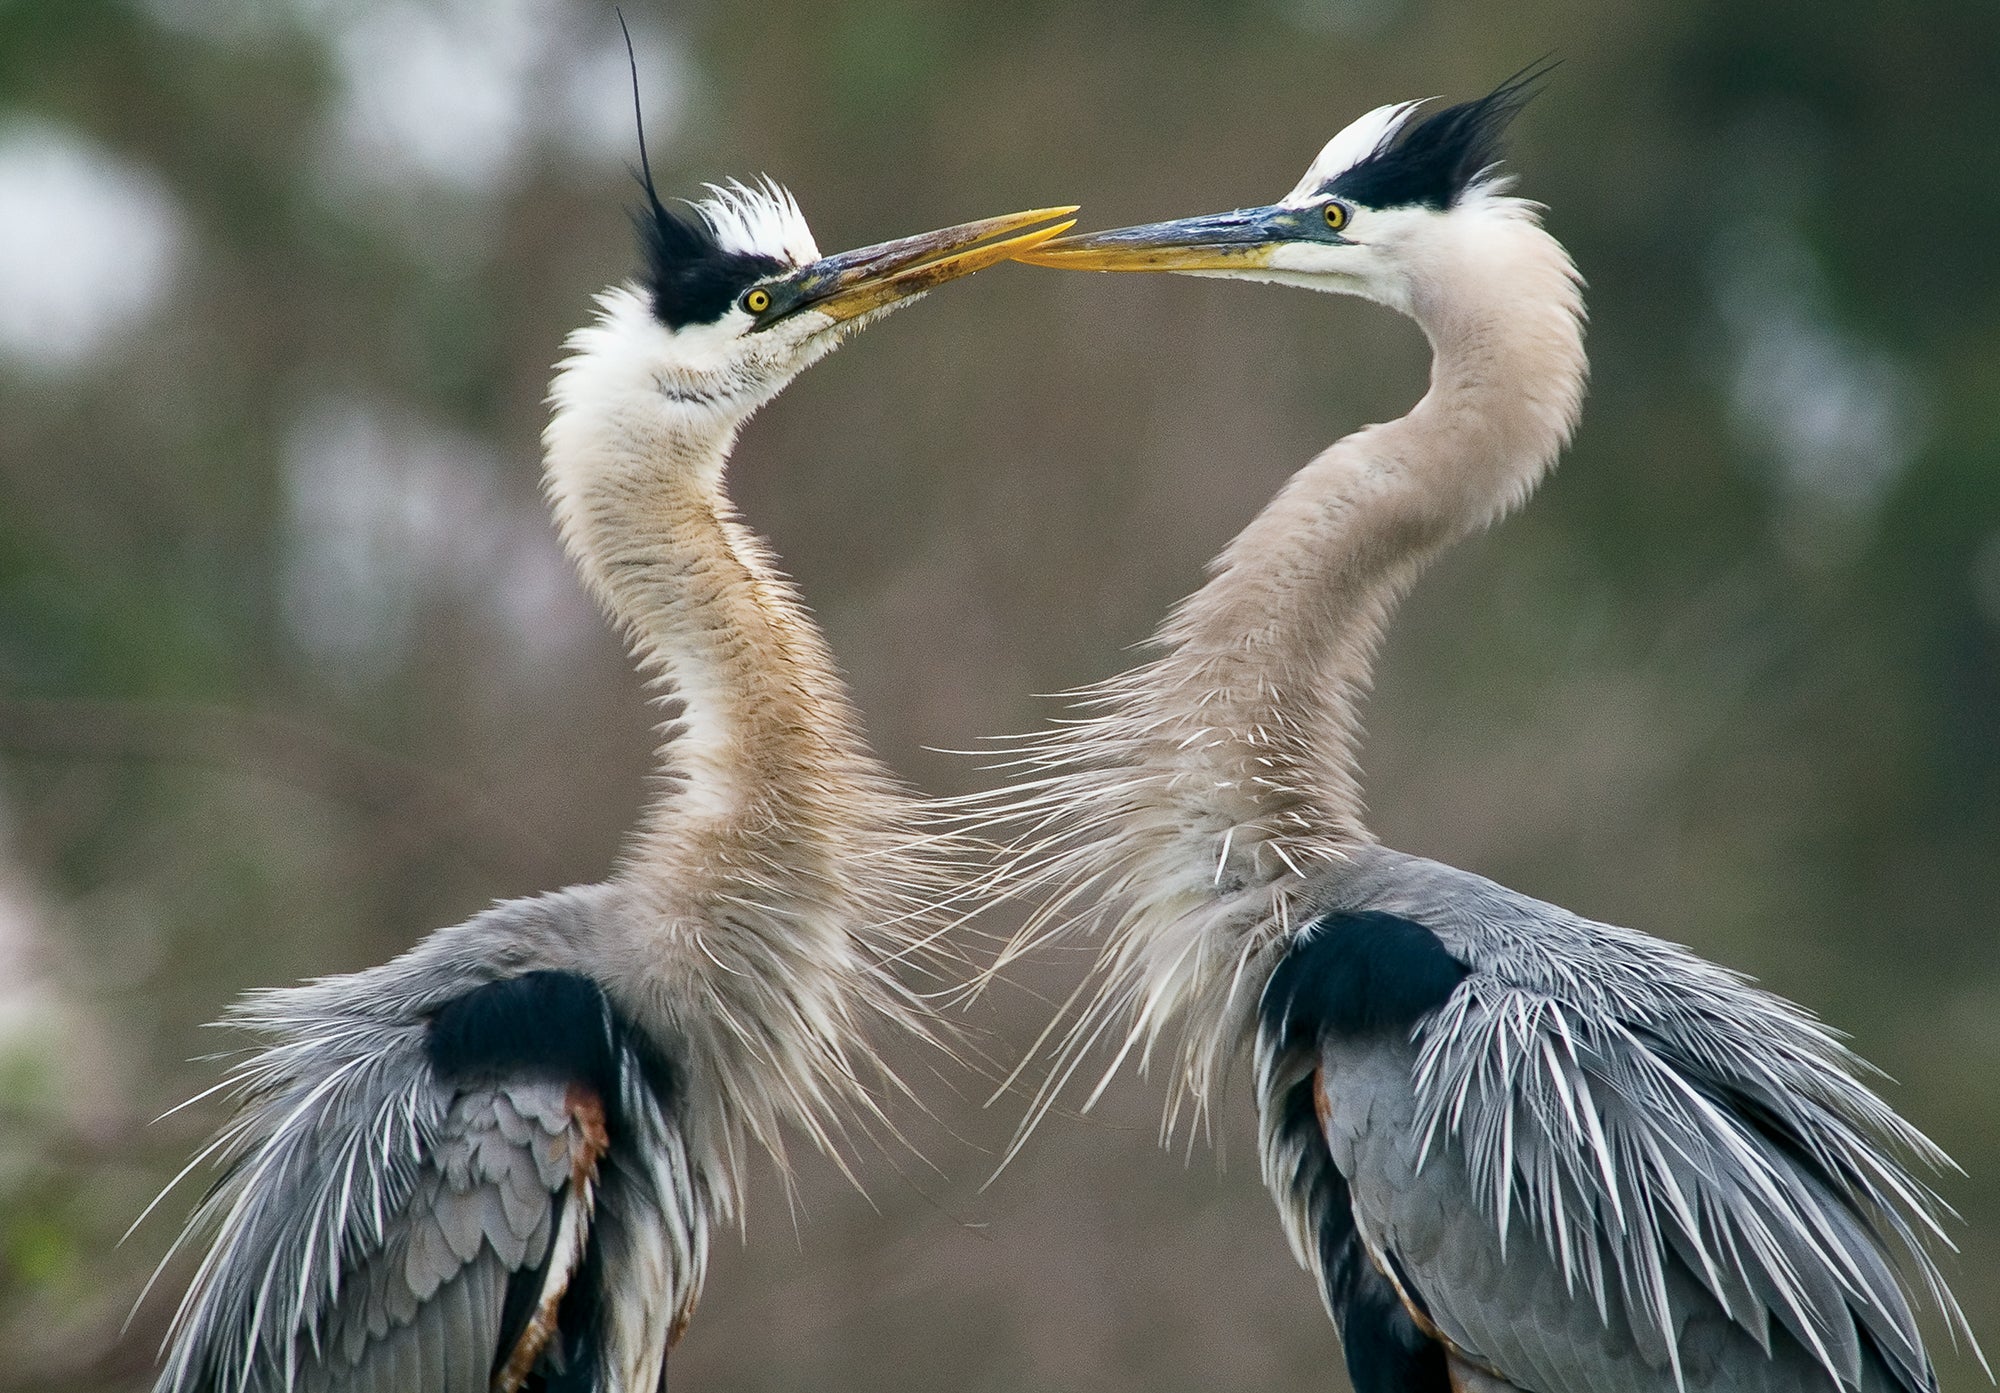 Two blue herons touching their beaks together. End of image description.